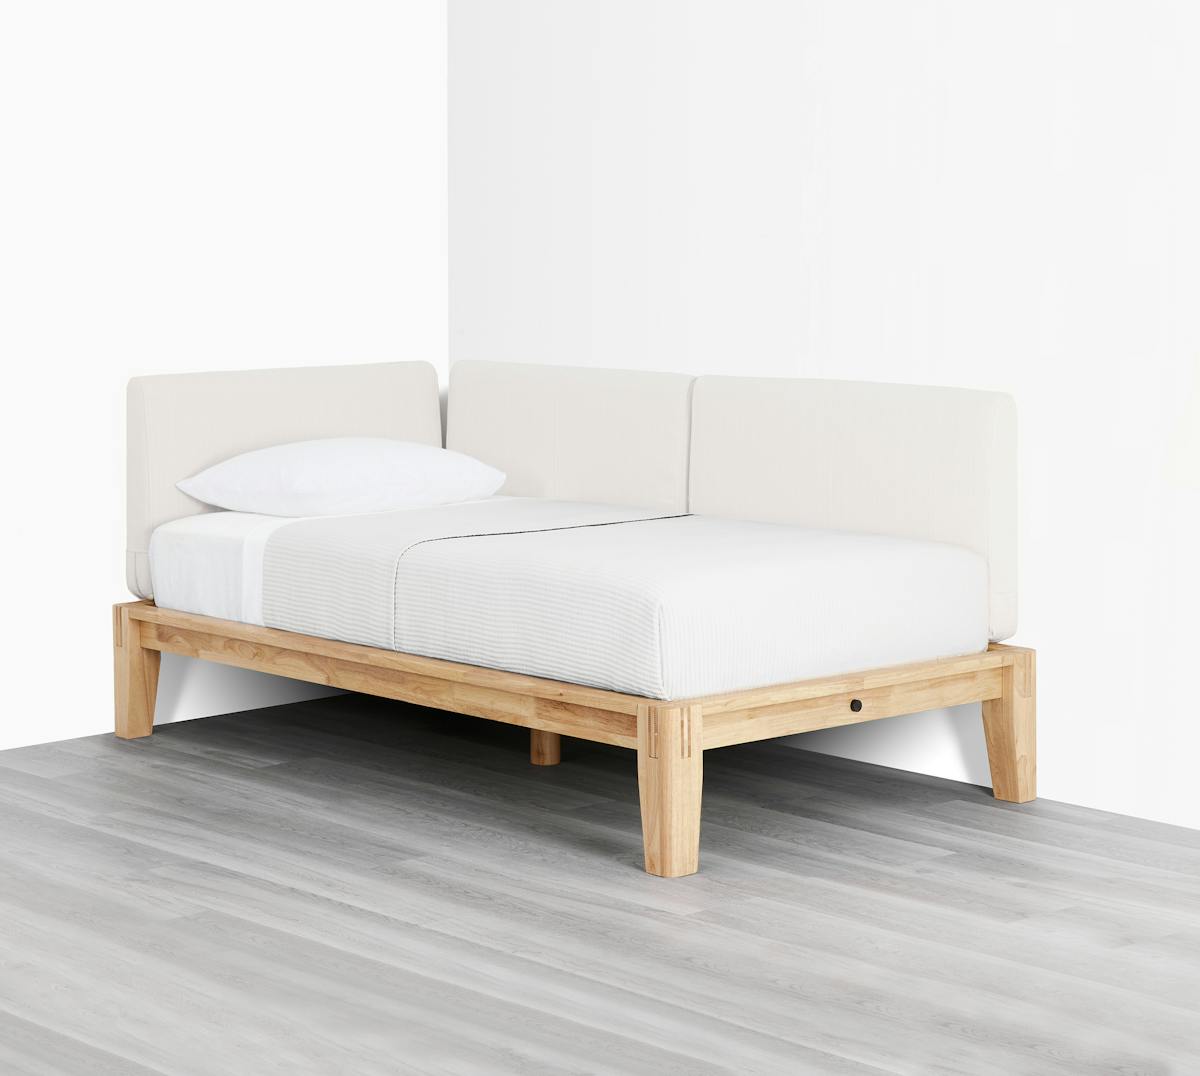 The Bed (Daybed / Natural / Light Linen) - Diagonal